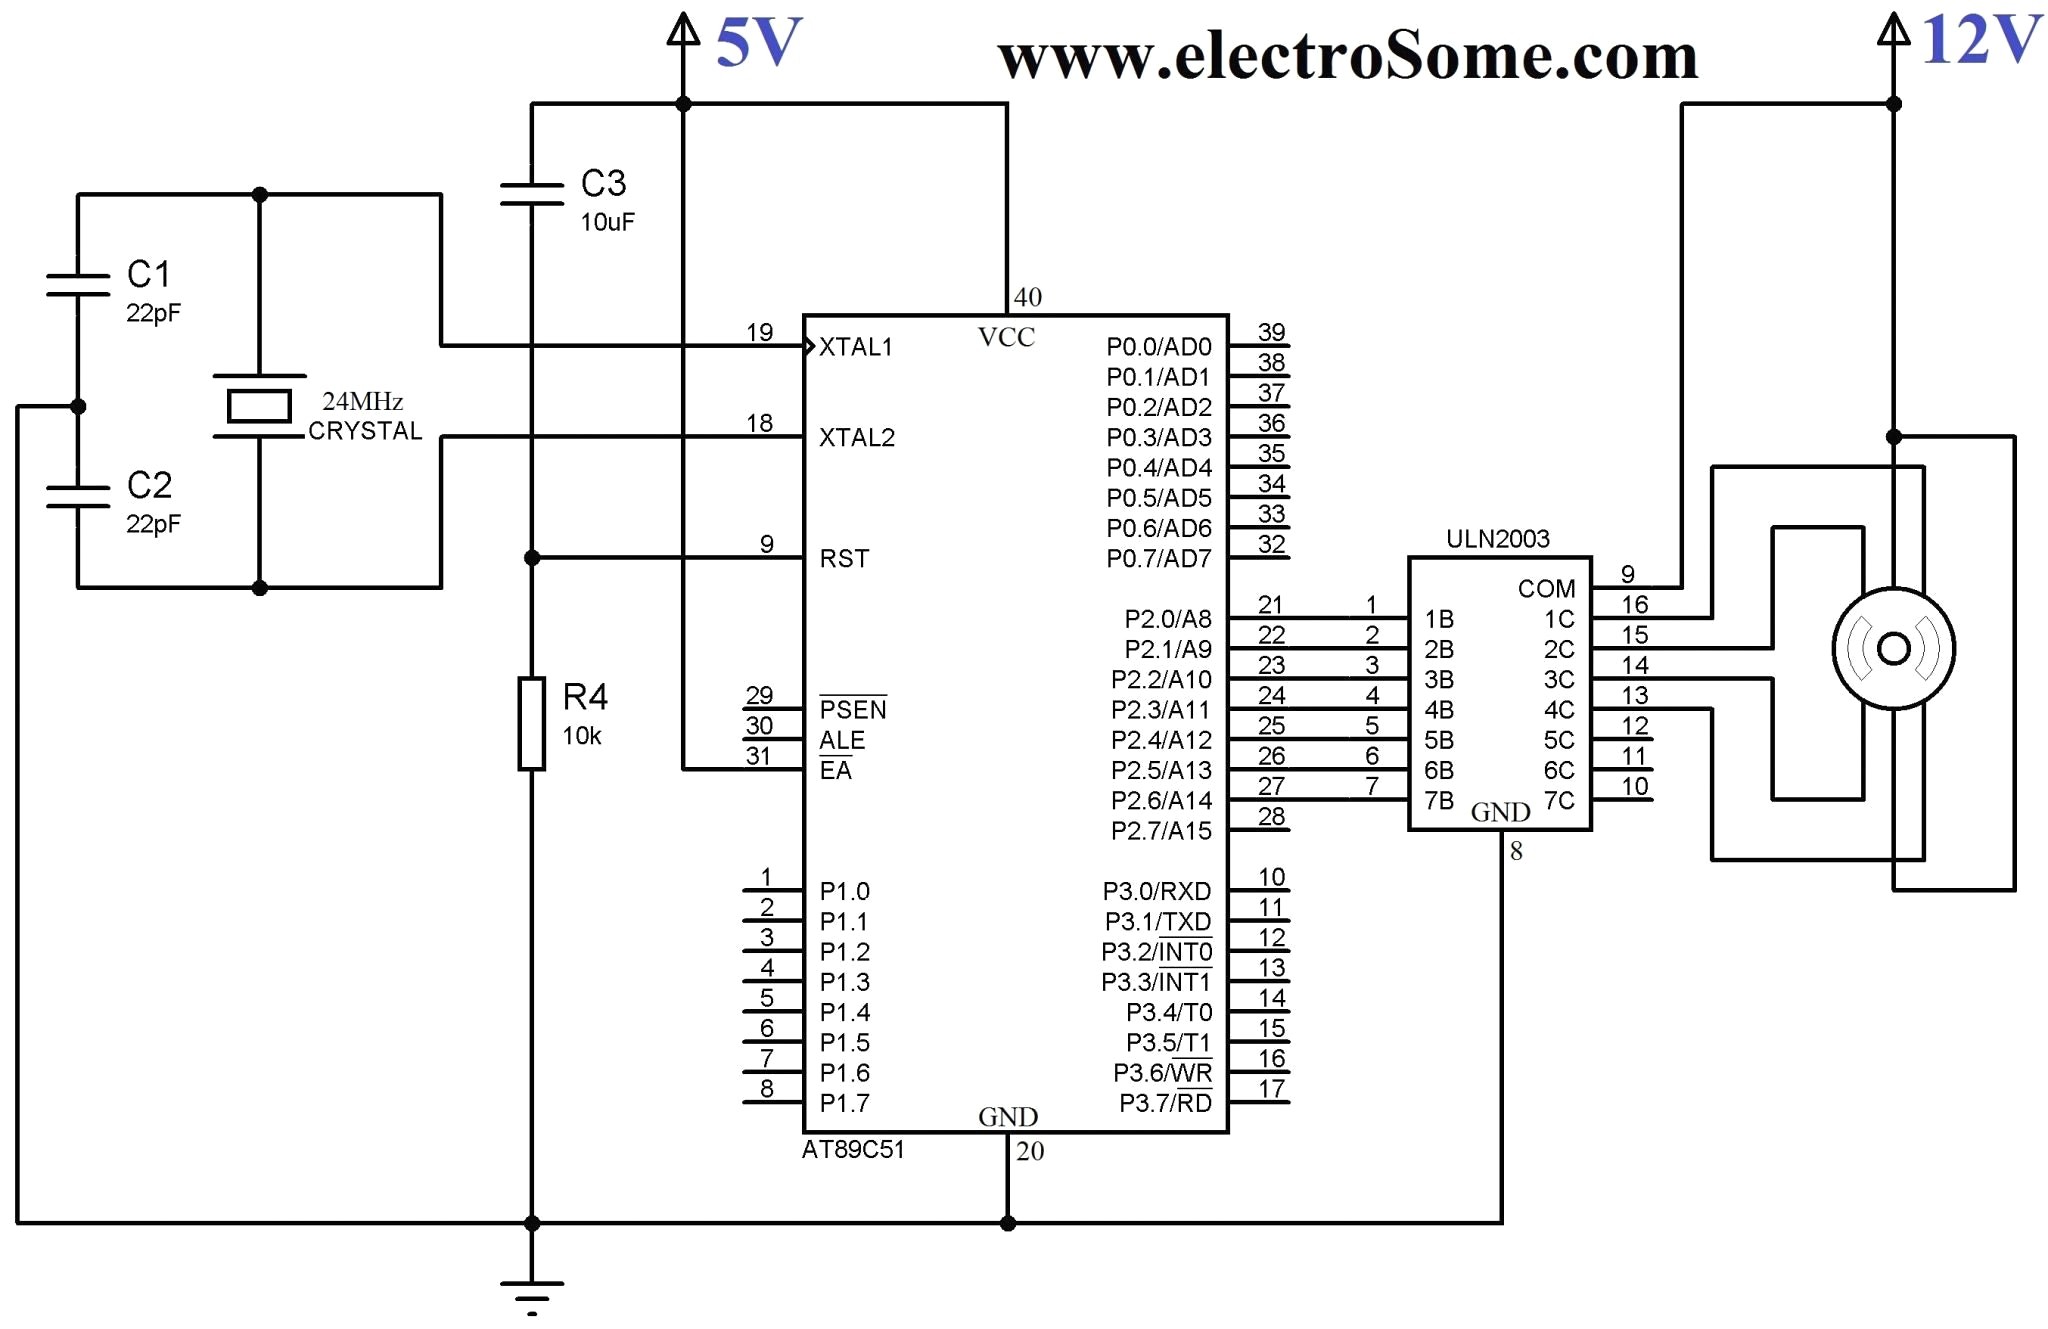 Lighting Contactor Wiring Diagram with cell Inspiration Lighting Contactor Wiring Diagram with cell In Ge Industrial